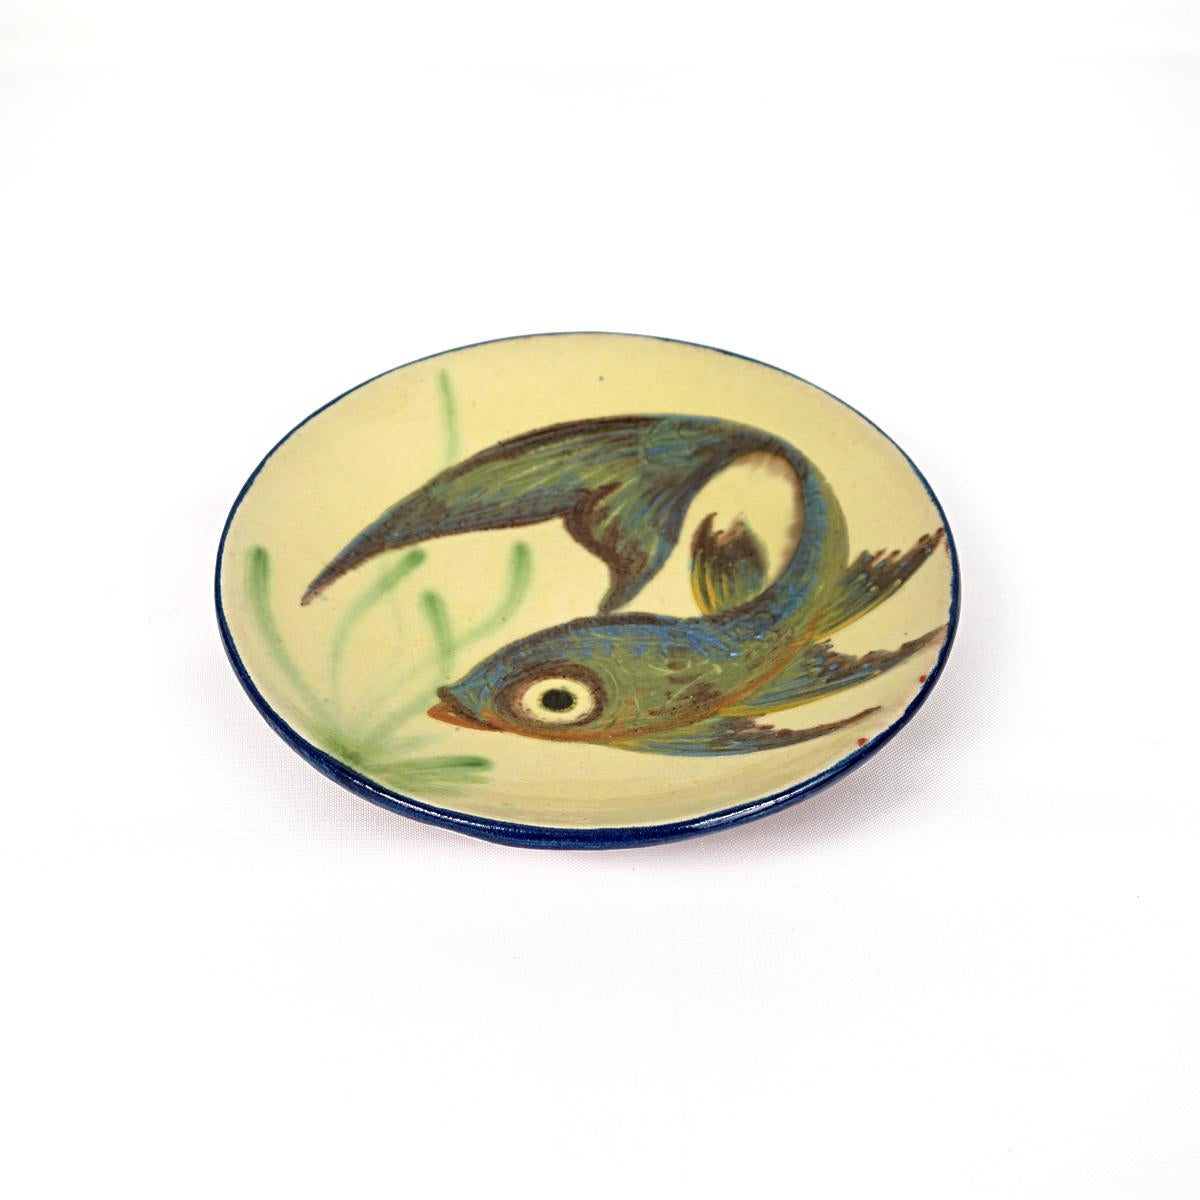 Set of 3 Ceramic Wall Plates with Fish Decor Signed by Spanish Maker Puigdemont For Sale 4